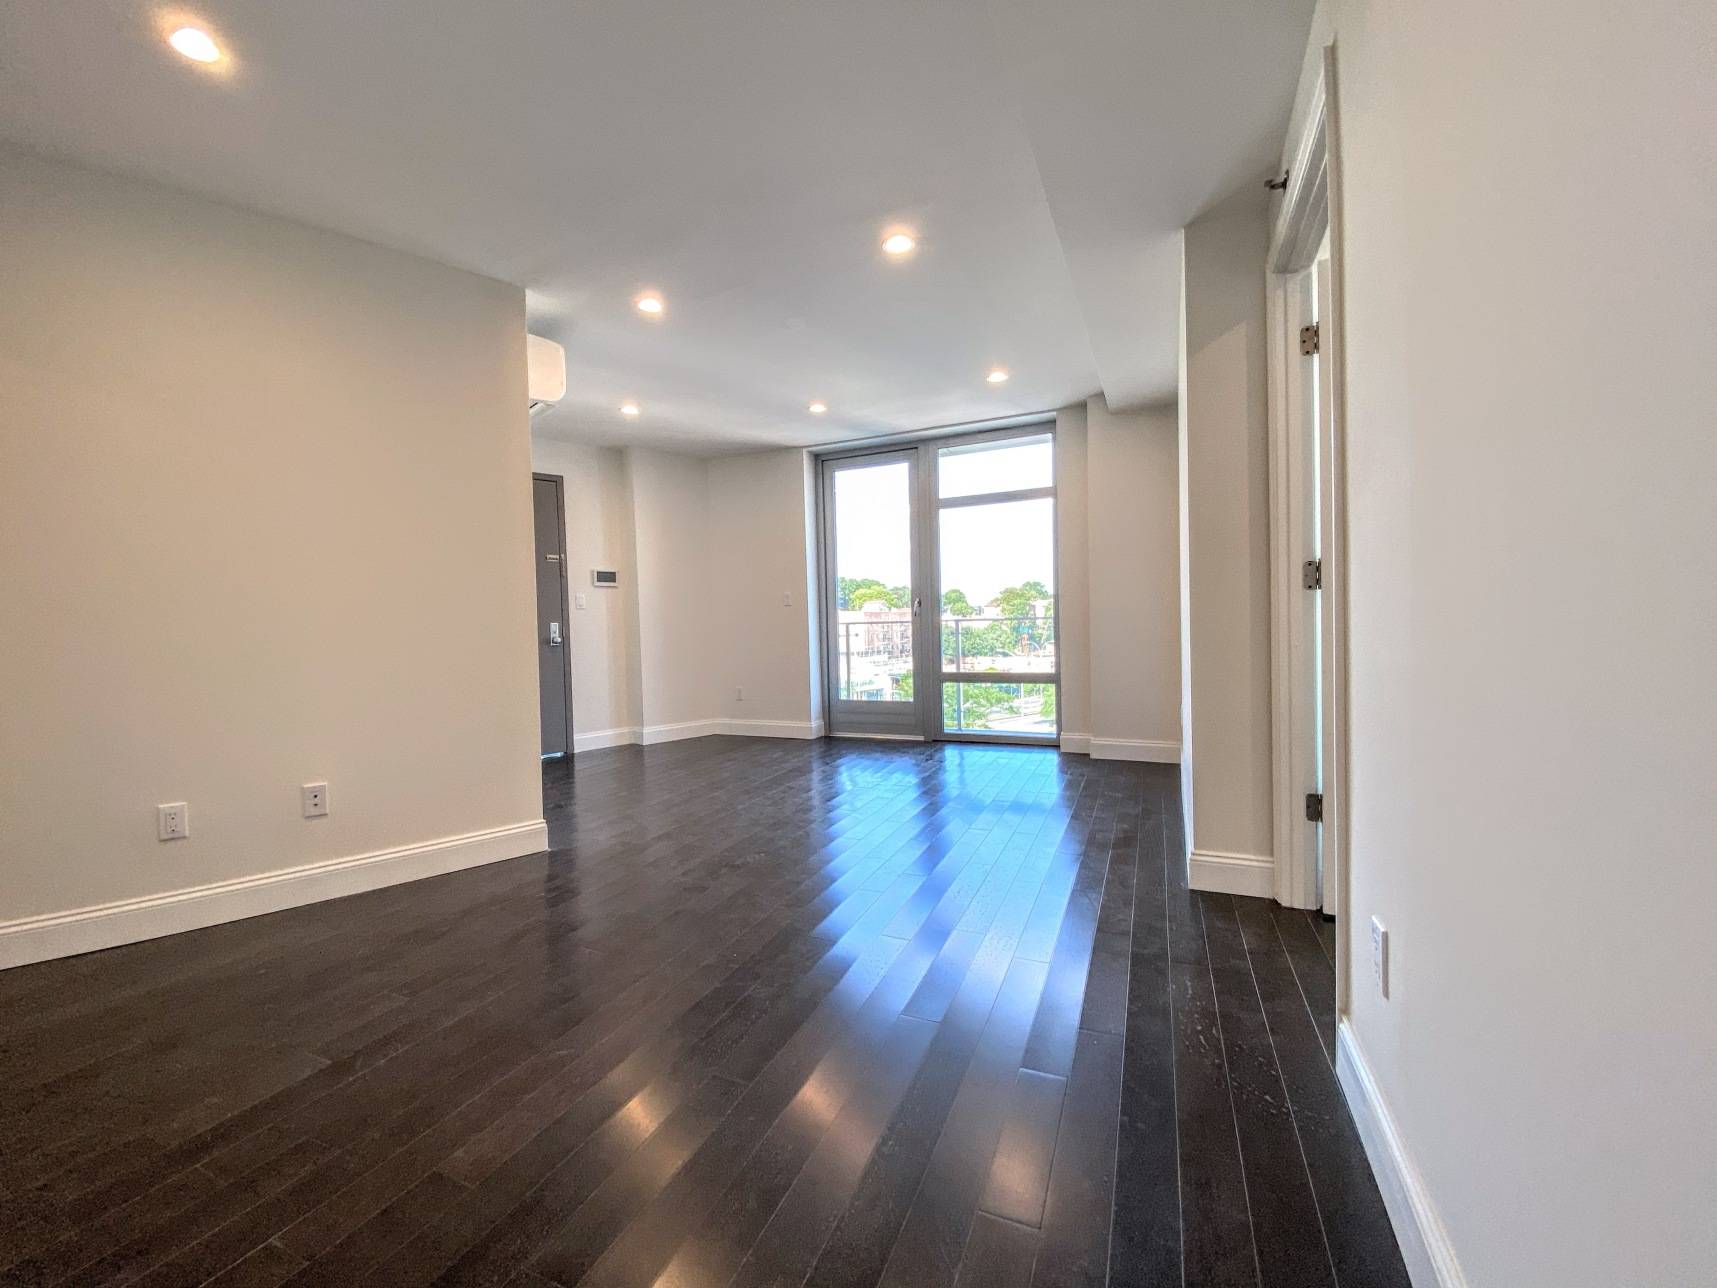 Woodside s stunning new luxury no fee rental building, 46 02 70th Street European finishes, beautiful wood floors, brilliant light from floor to ceiling windows and perfect floorplans.